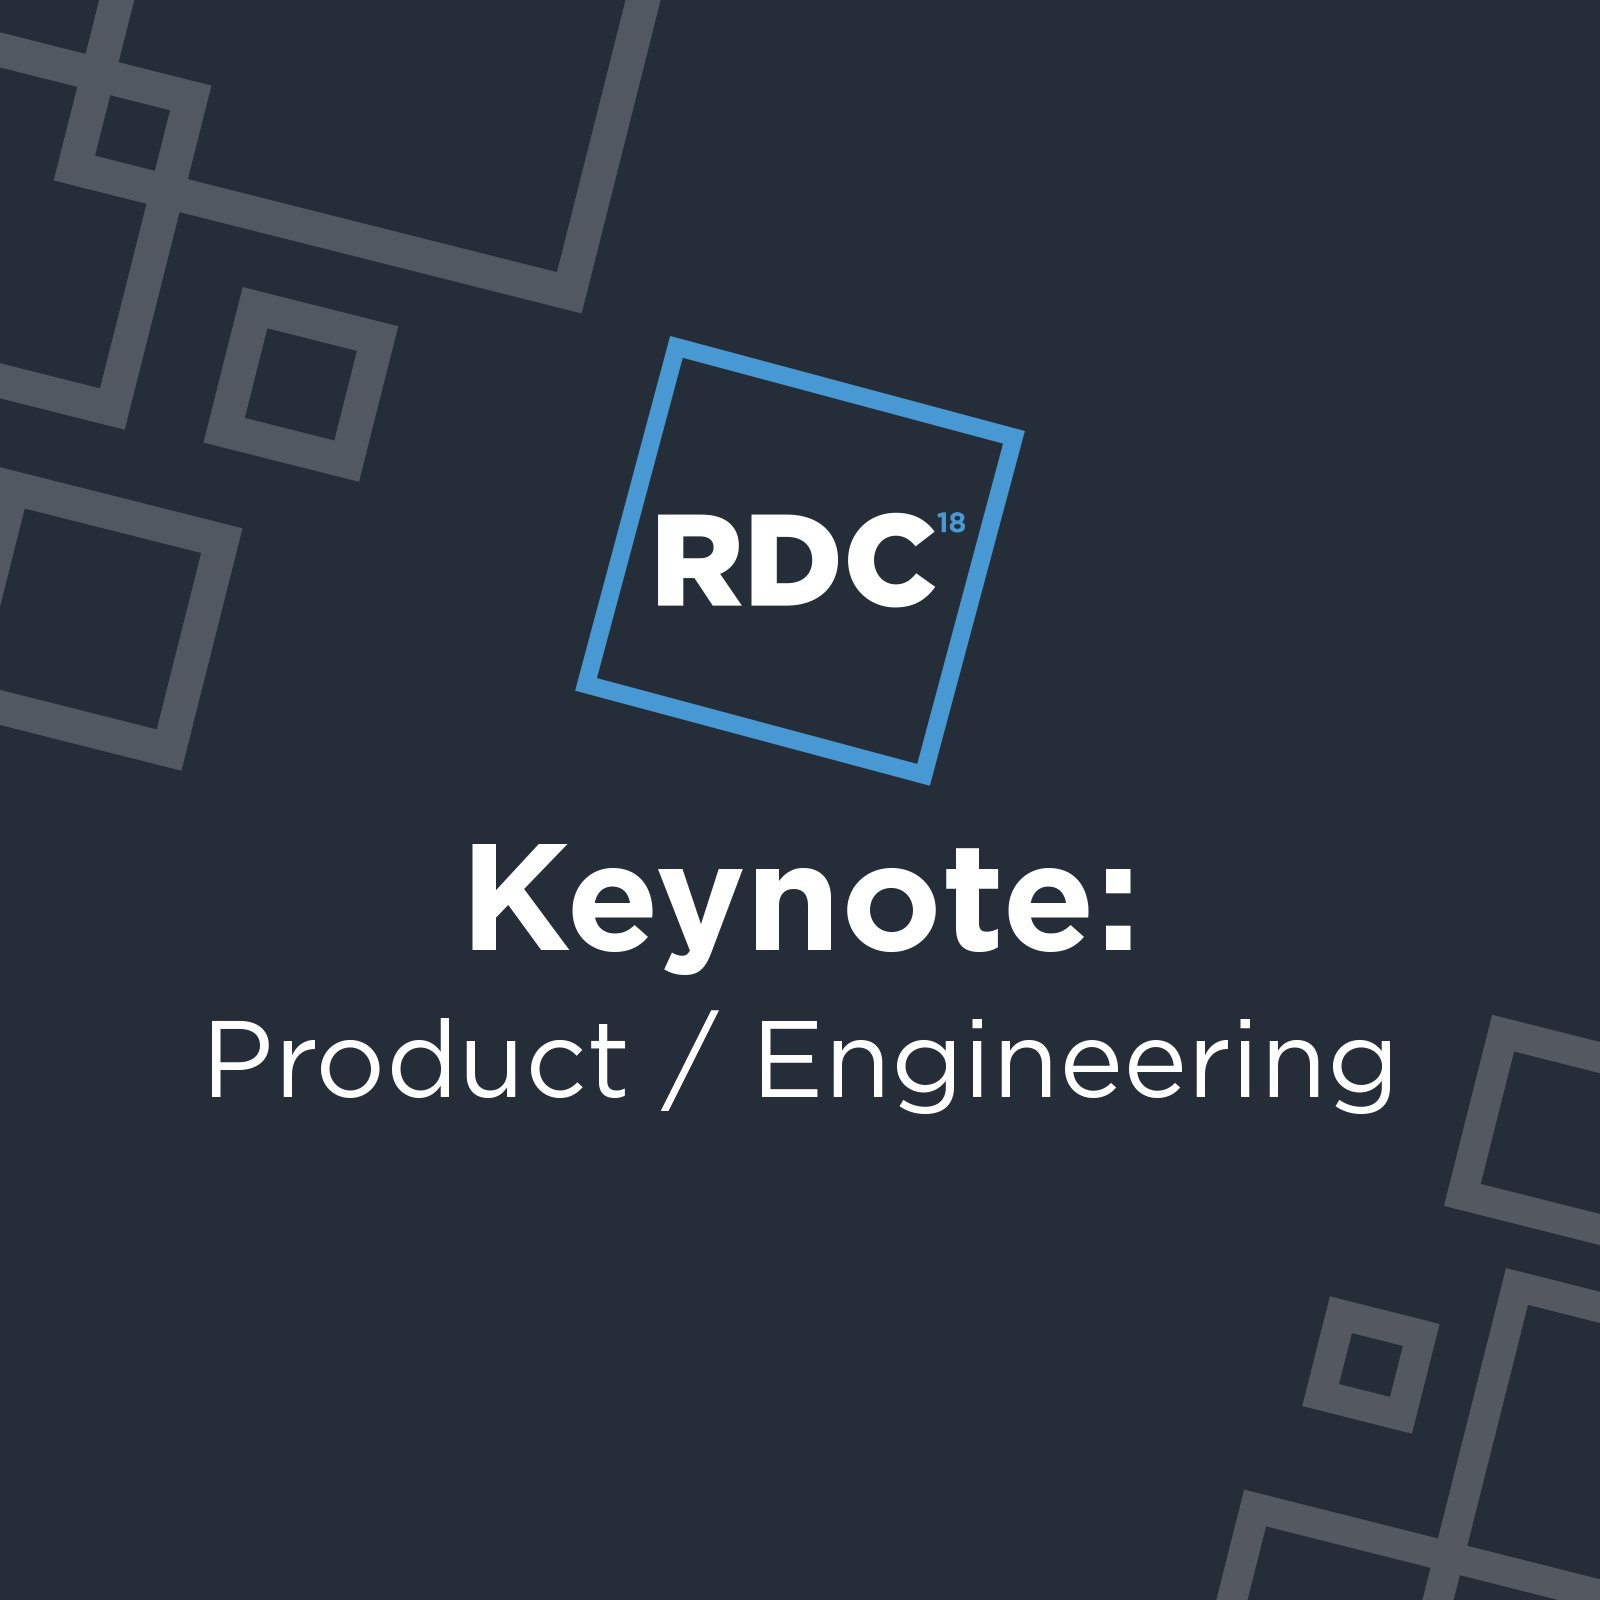 Roblox Developer Relations On Twitter Product Is Up Next Find Out What The Roblox Product Team Is Working On During The Rdc2018 Keynote Given By Adam Miller Tune In To Https T Co 8iszqvm7gp Or - roblox developer product